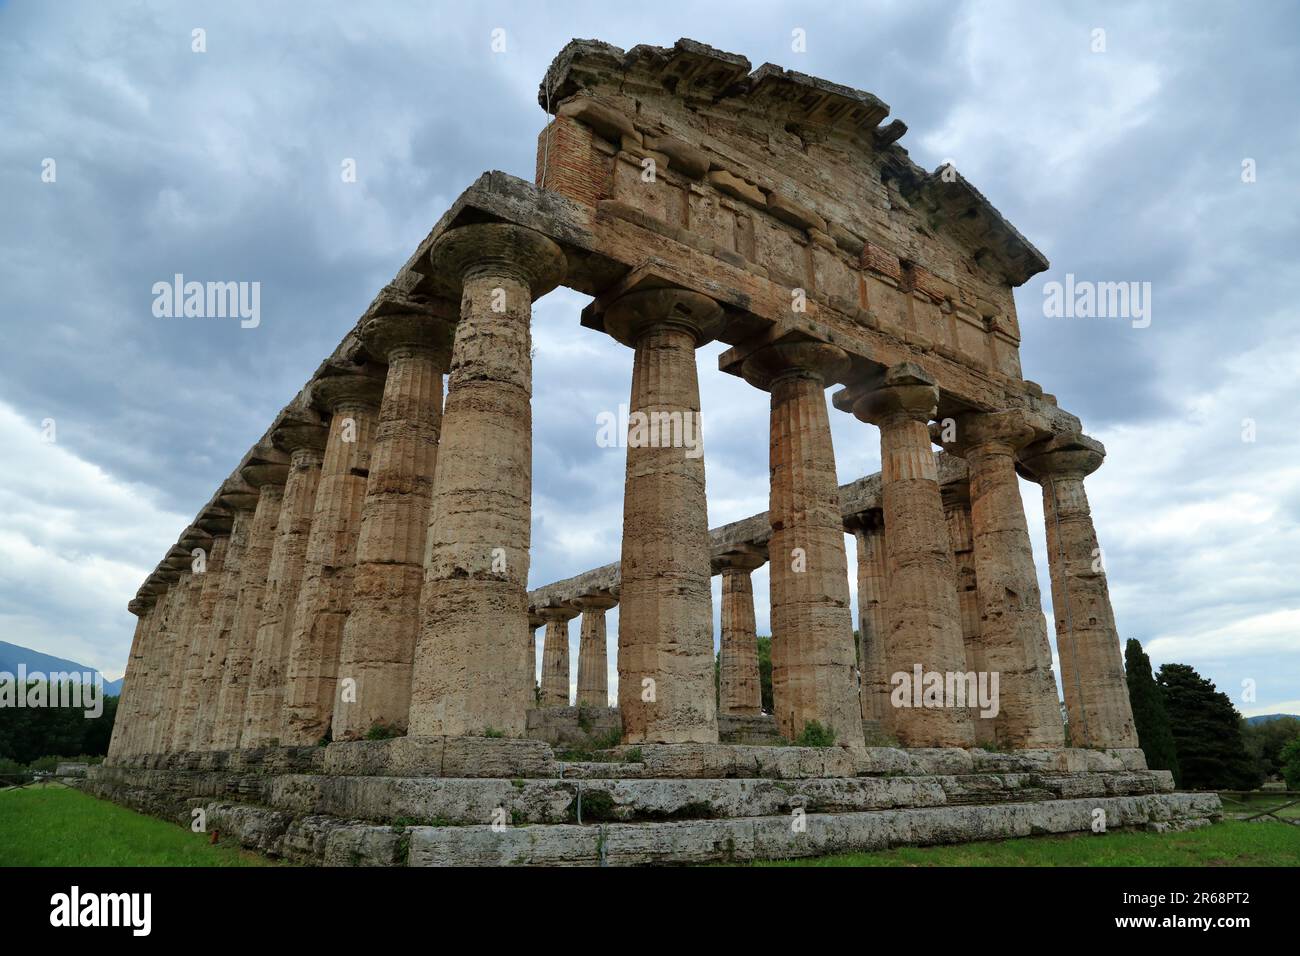 Greek temples of the ancient Greek city Paestum in Italy. Temple of Athena. Templi di paestum Stock Photo